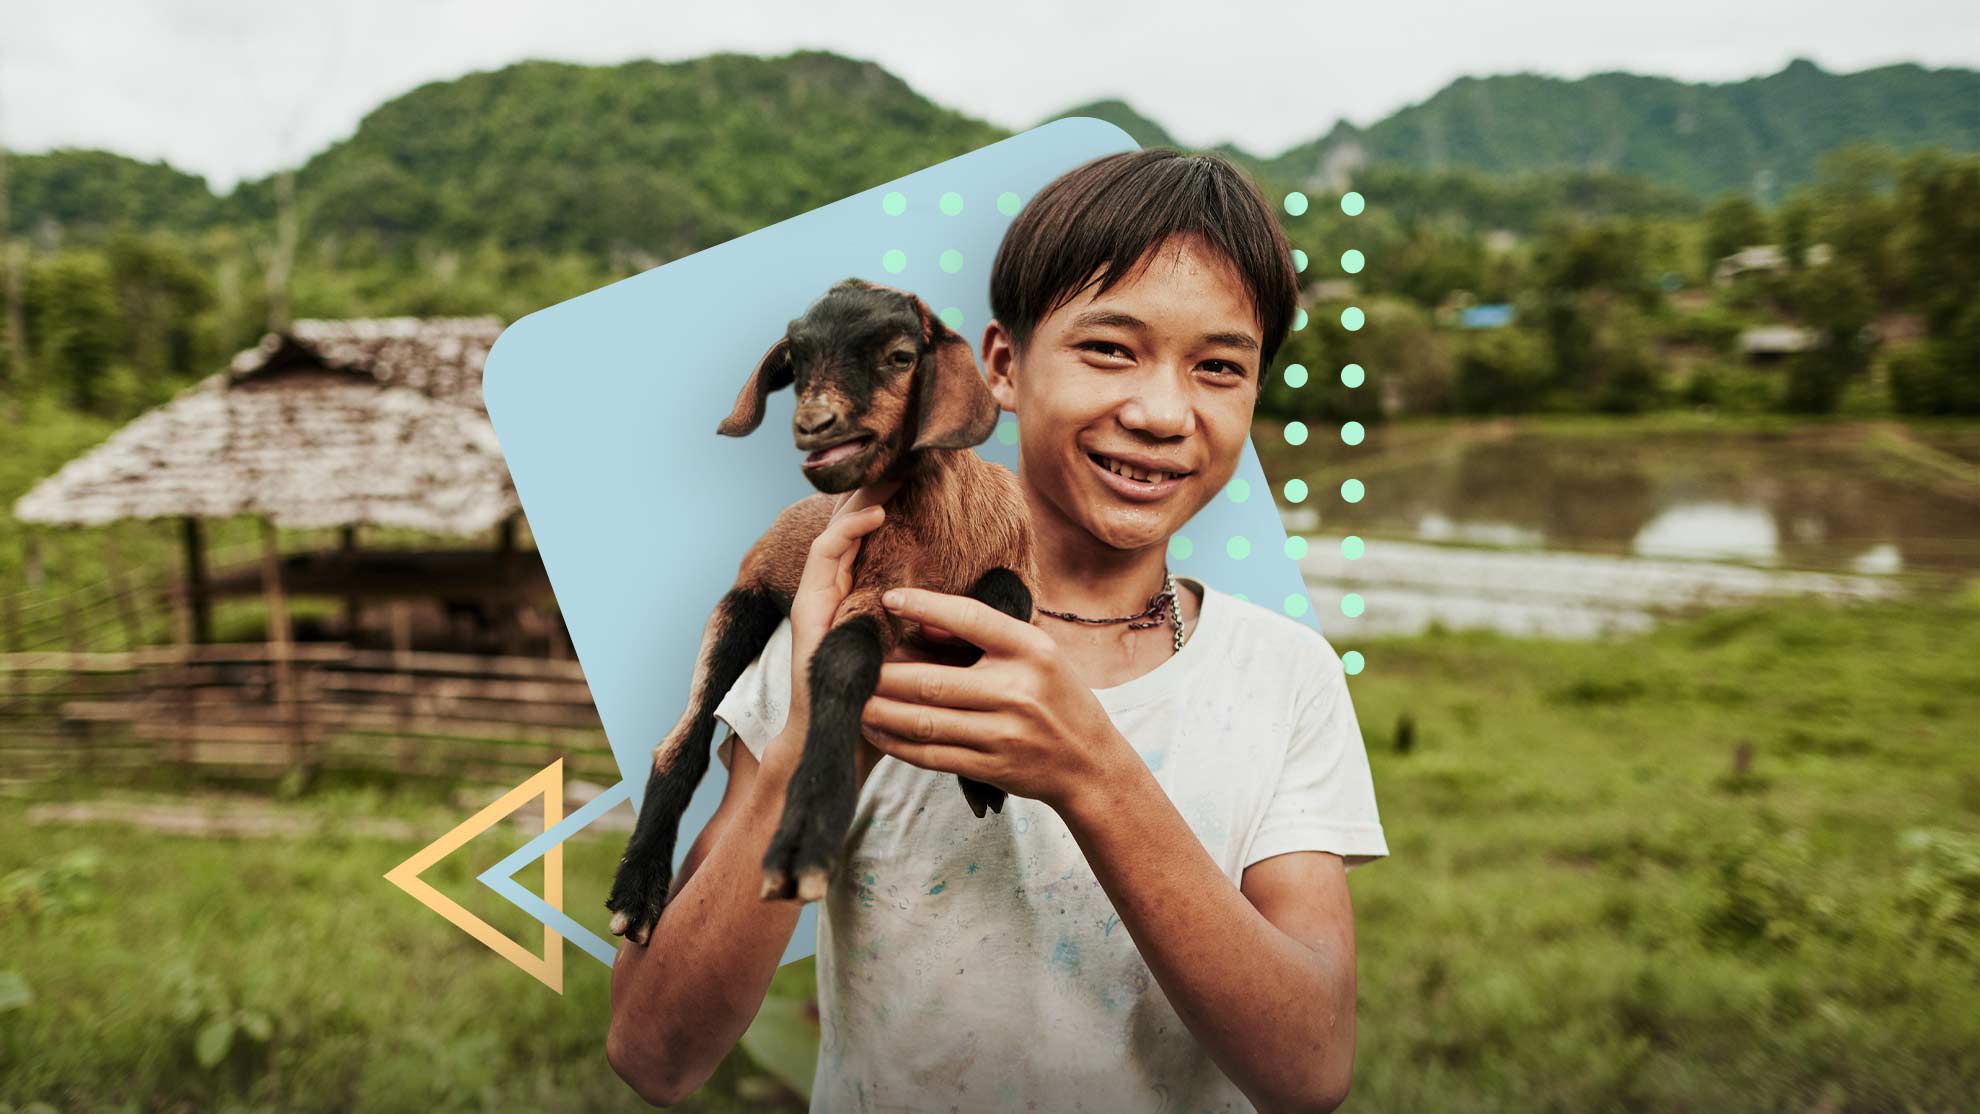 An Asian boy stands in a green field holding a brown goat on his shoulder.